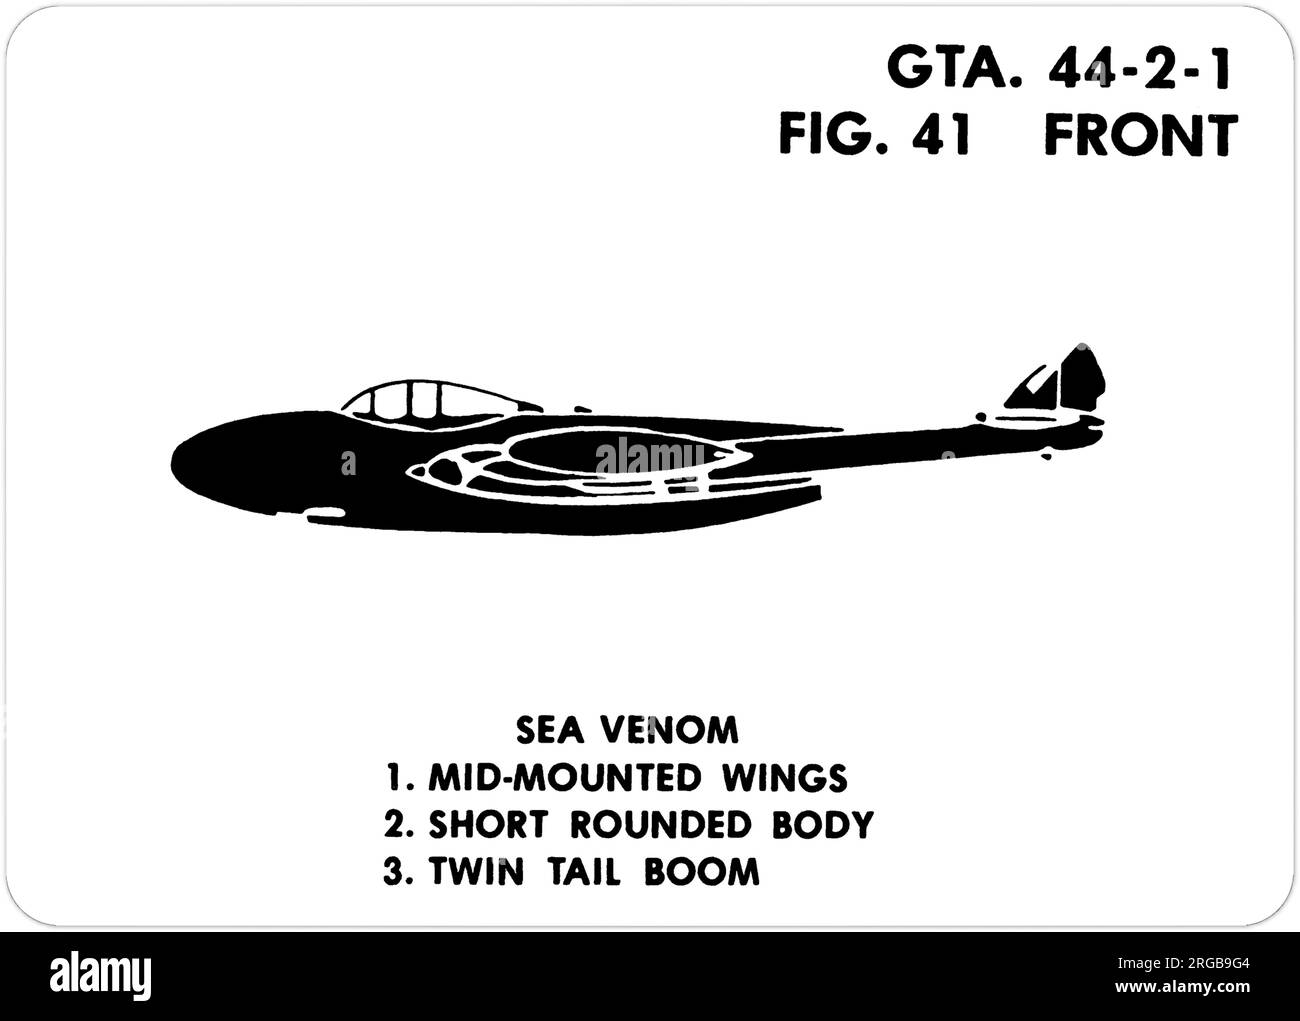 de Havilland Sea Venom F(AW).23. This is one of the series of Graphics Training Aids (GTA) used by the United States Army to train their personnel to recognize friendly and hostile aircraft. This particular set, GTA 44-2-1, was issued in July1977. The set features aircraft from: Canada, Italy, United Kingdom, United States, and the USSR. Stock Photo